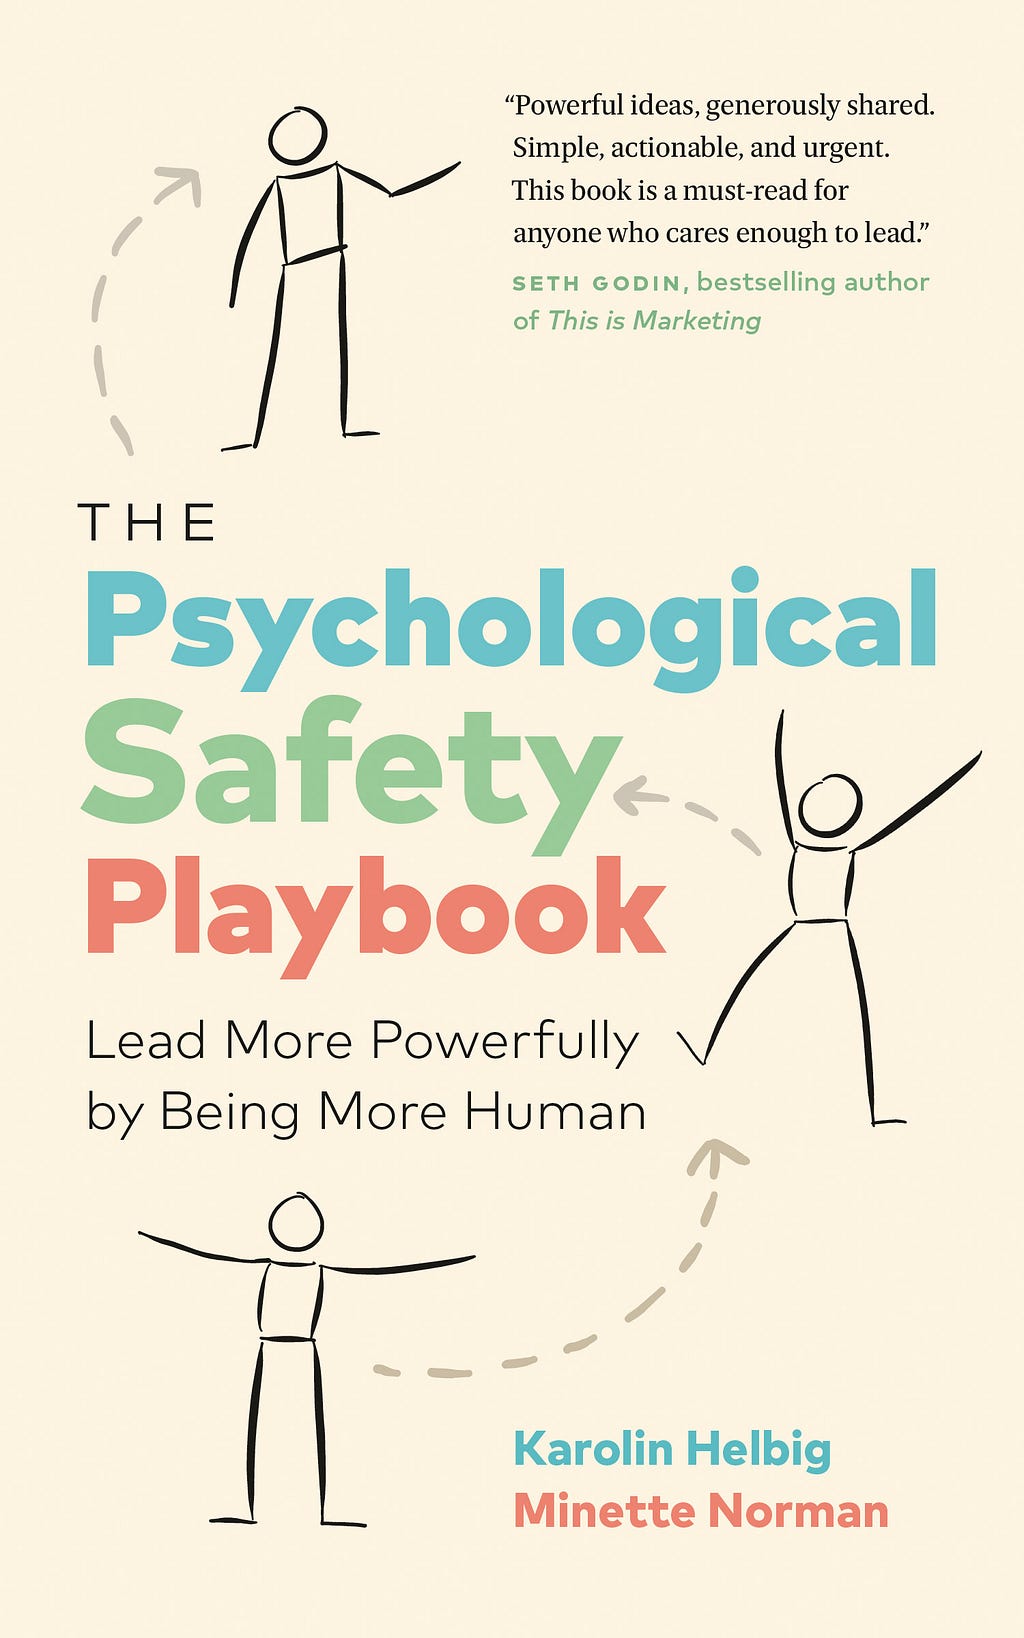 [PDF] The Psychological Safety Playbook: Lead More Powerfully by Being More Human By Karolin Helbig